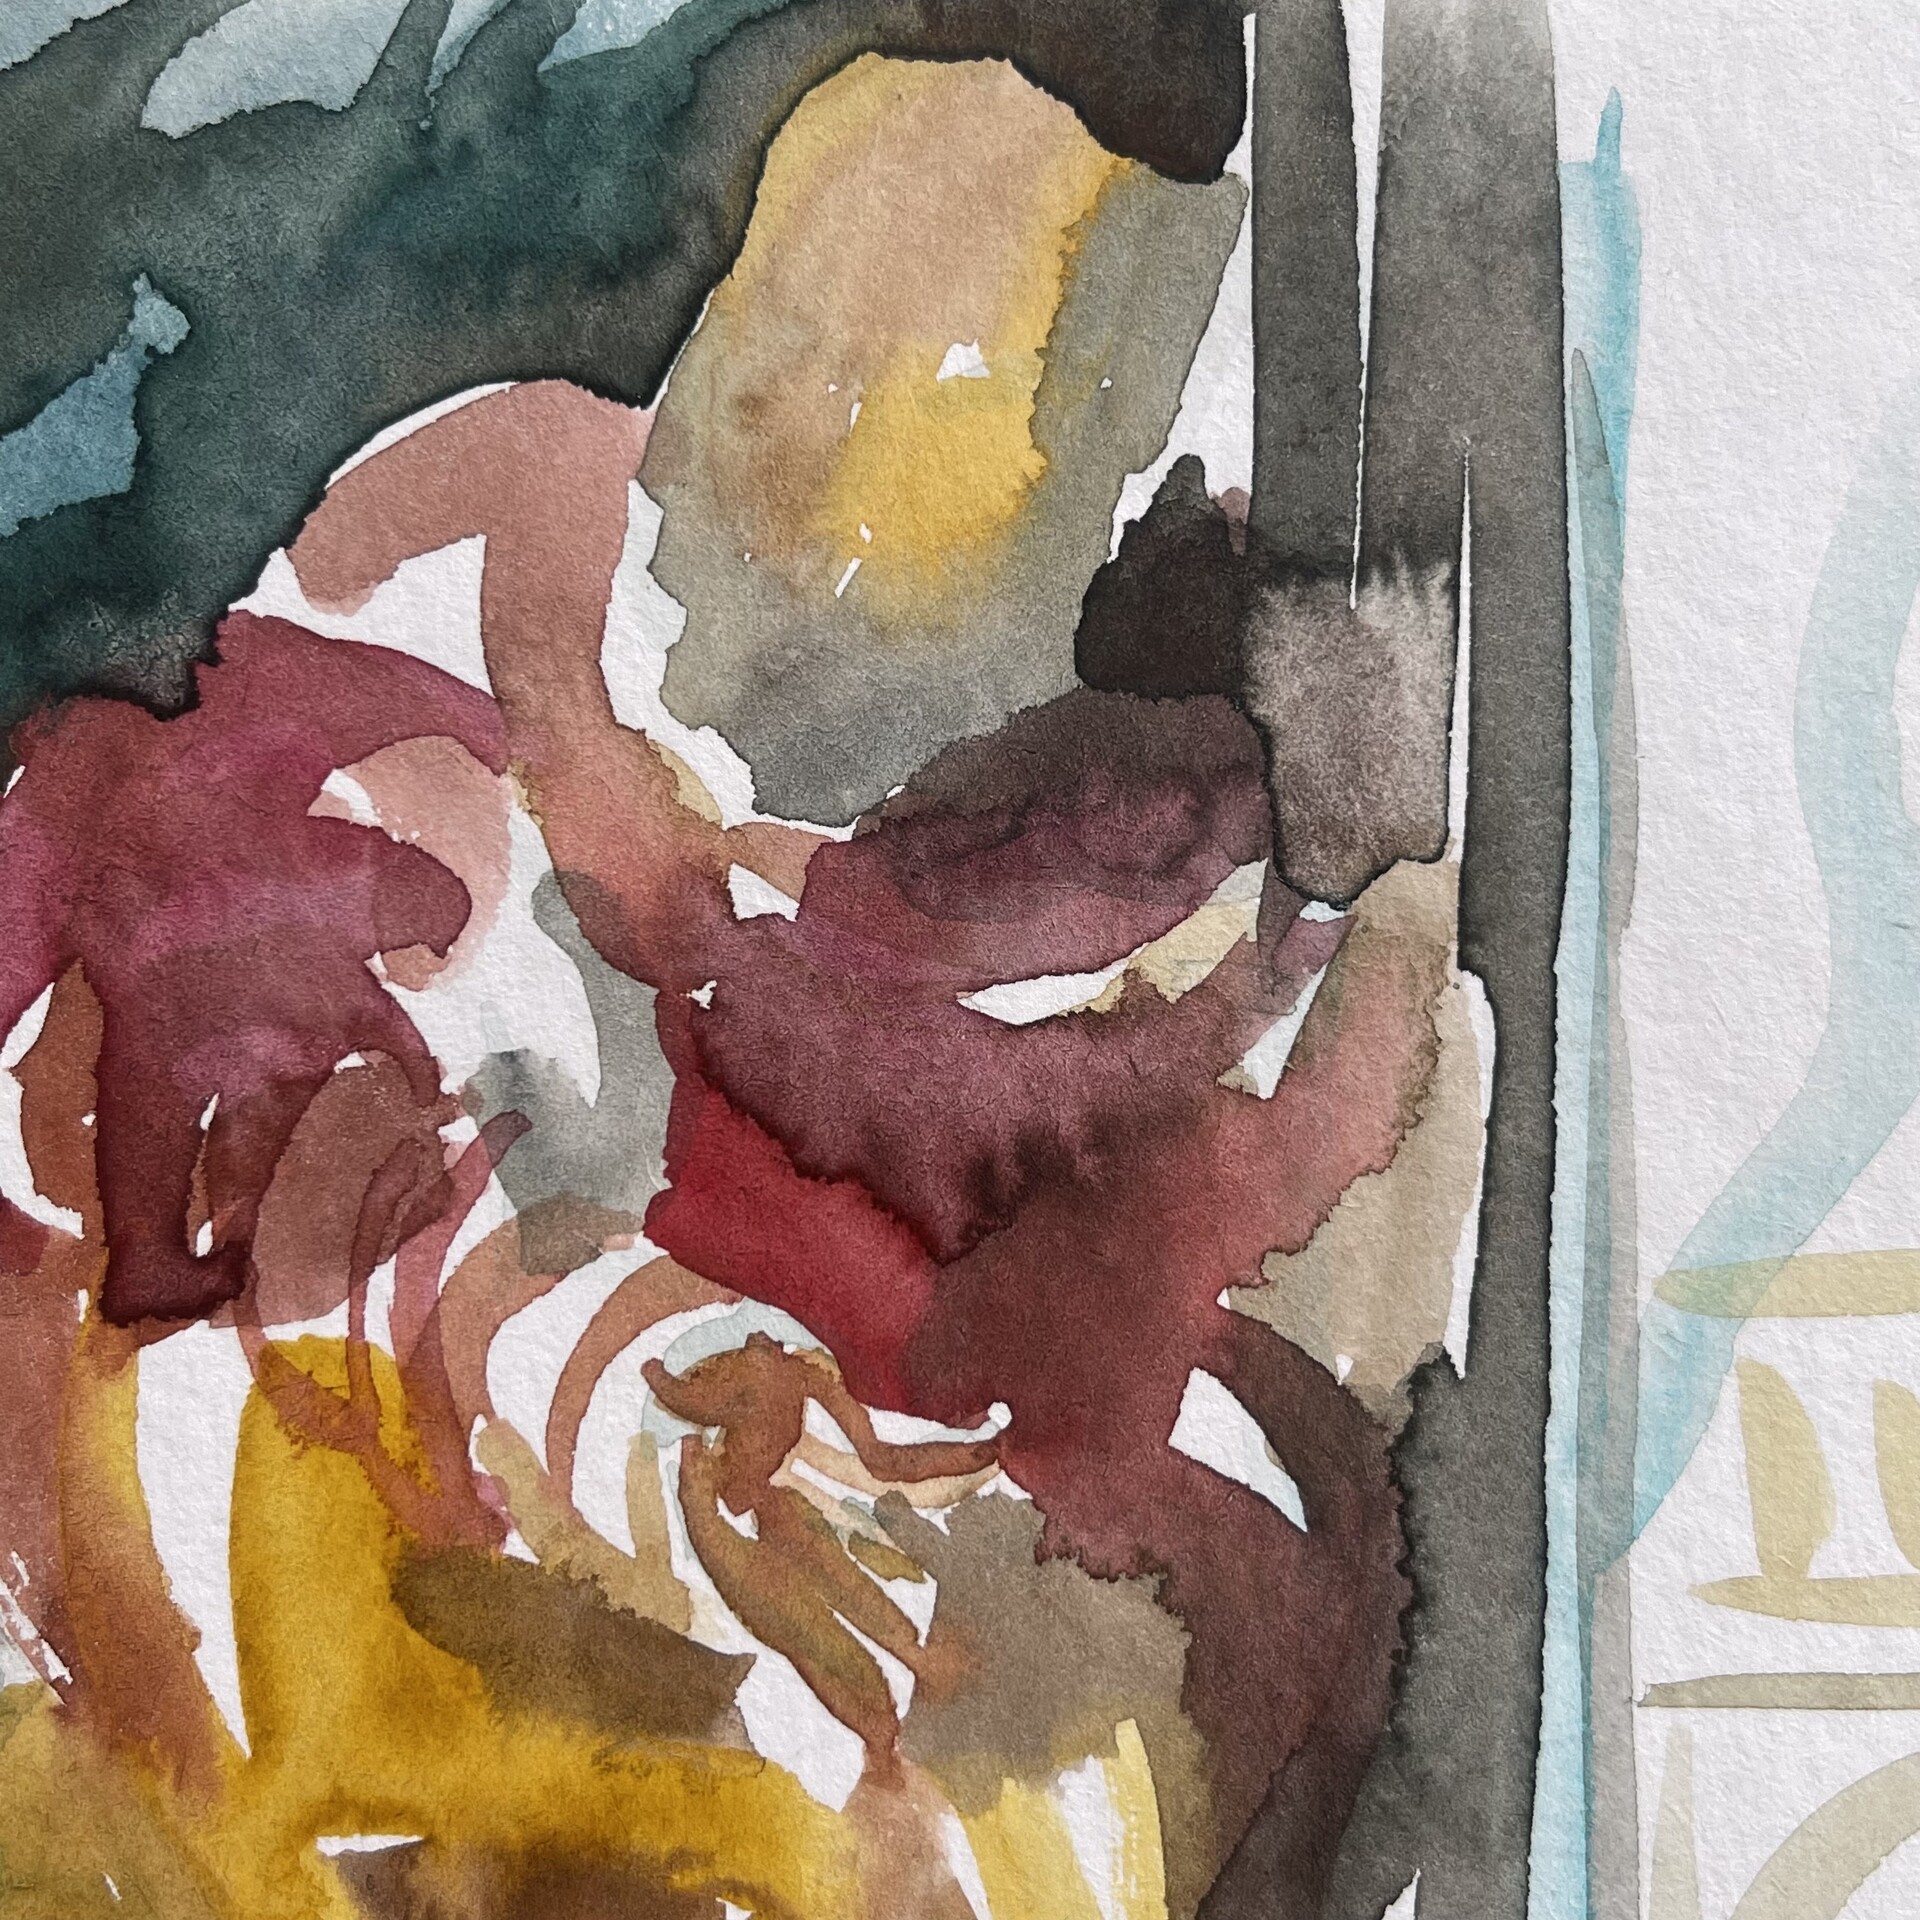 “Bathsheba at her Bath” inspired by Paolo Veronese “Bathsheba at her Bath” (1575), 29,7 x 21 cm, watercolour on paper, 2021, detail